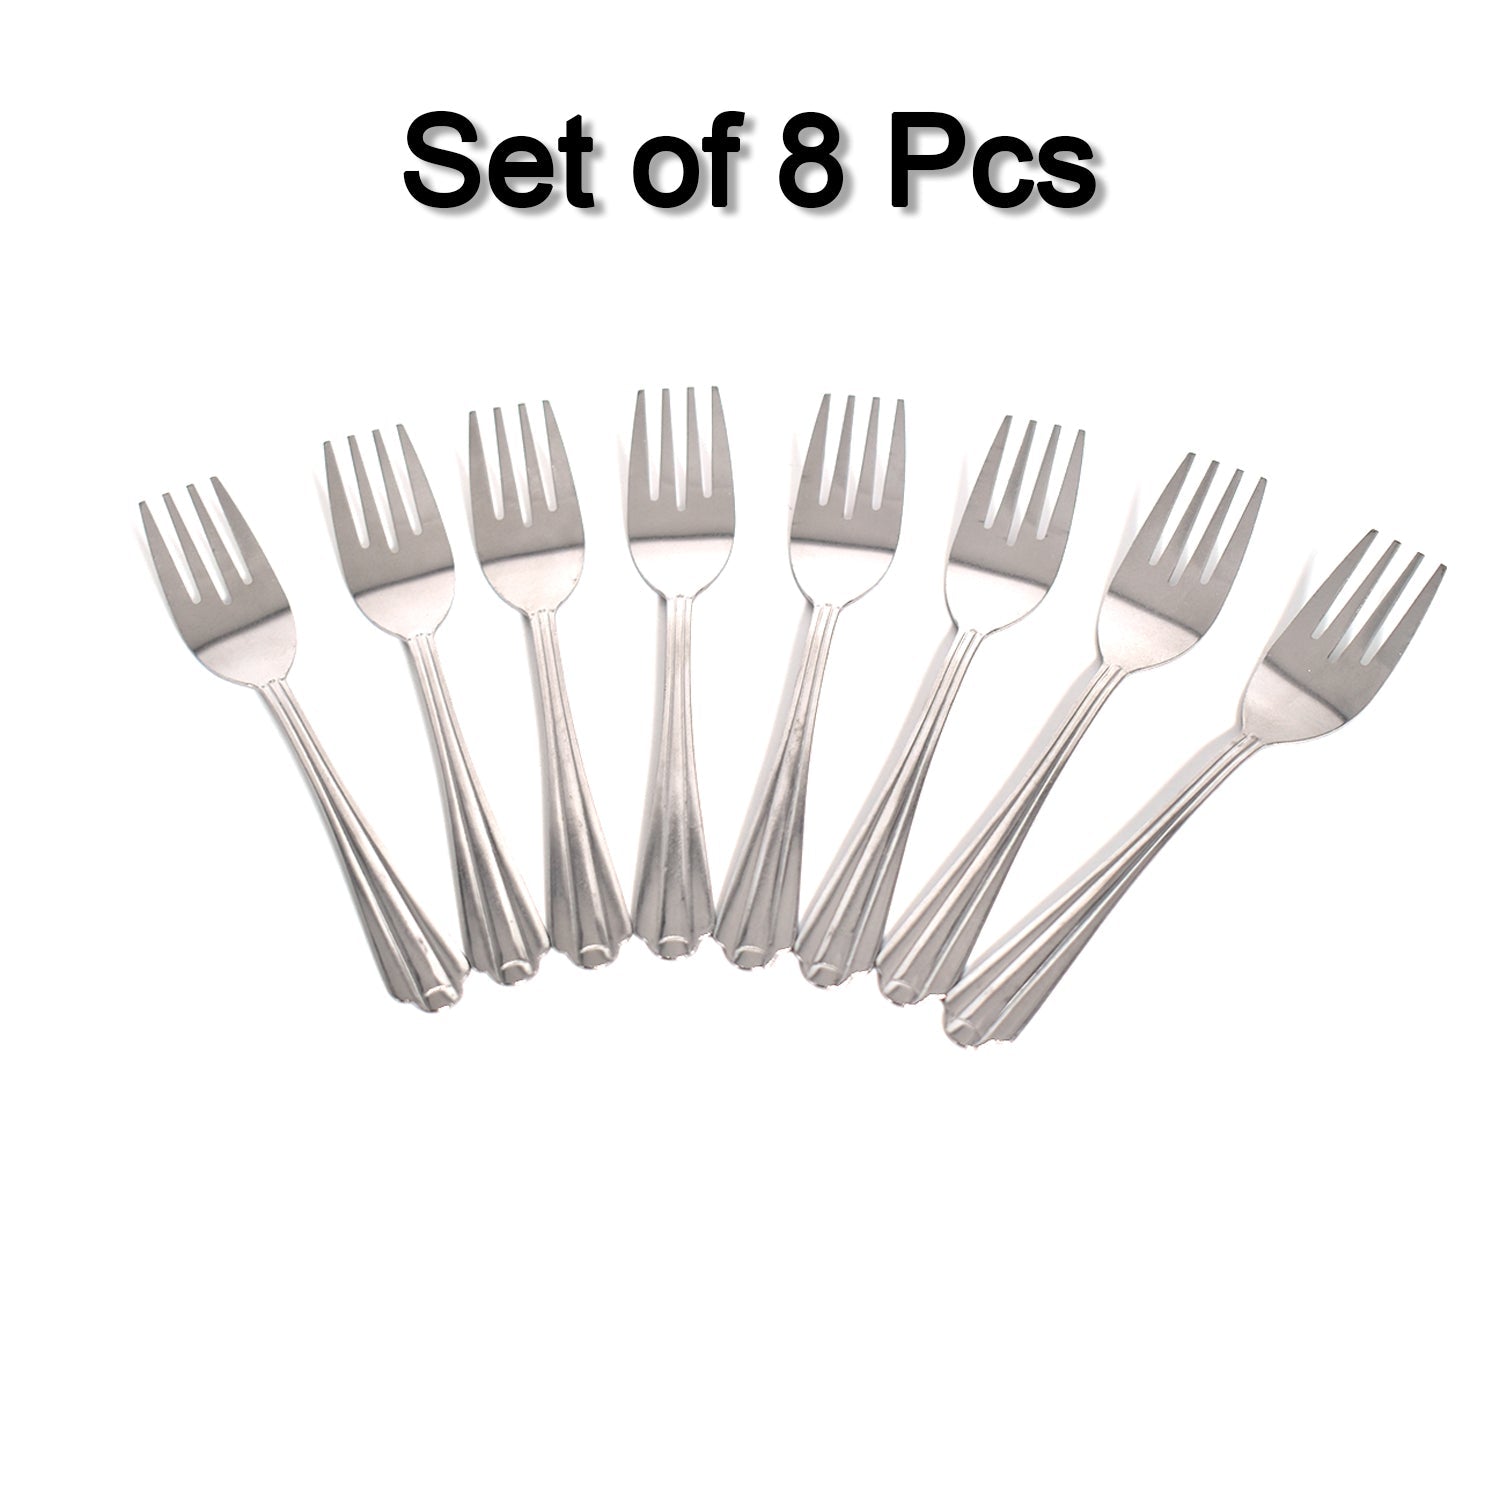 2775 Small Dinner Fork for home and kitchen. (set of 8Pc) DeoDap